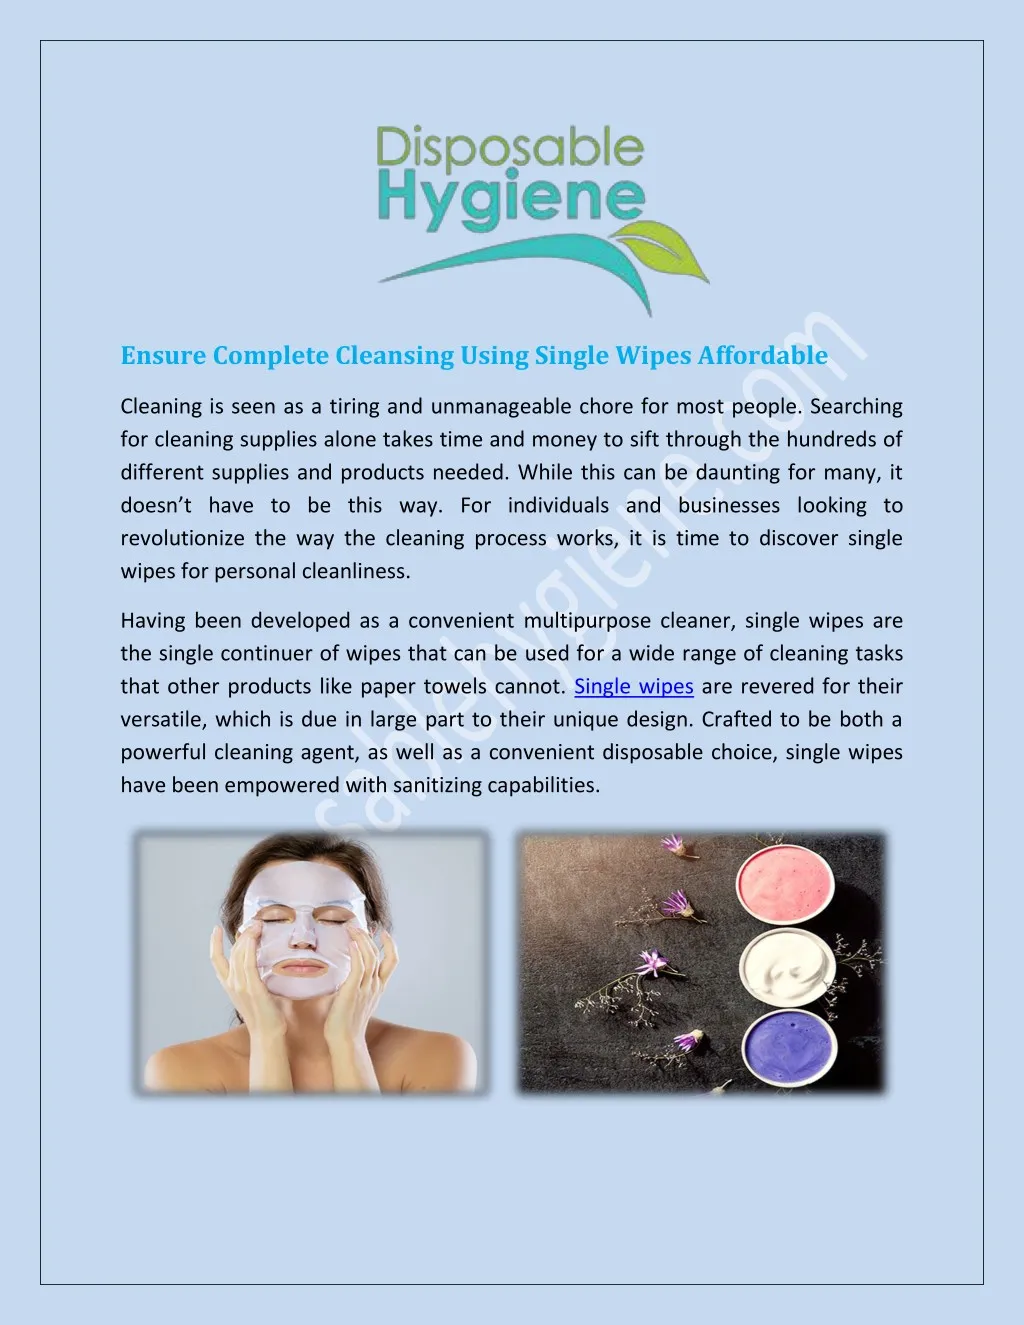 ensure complete cleansing using single wipes